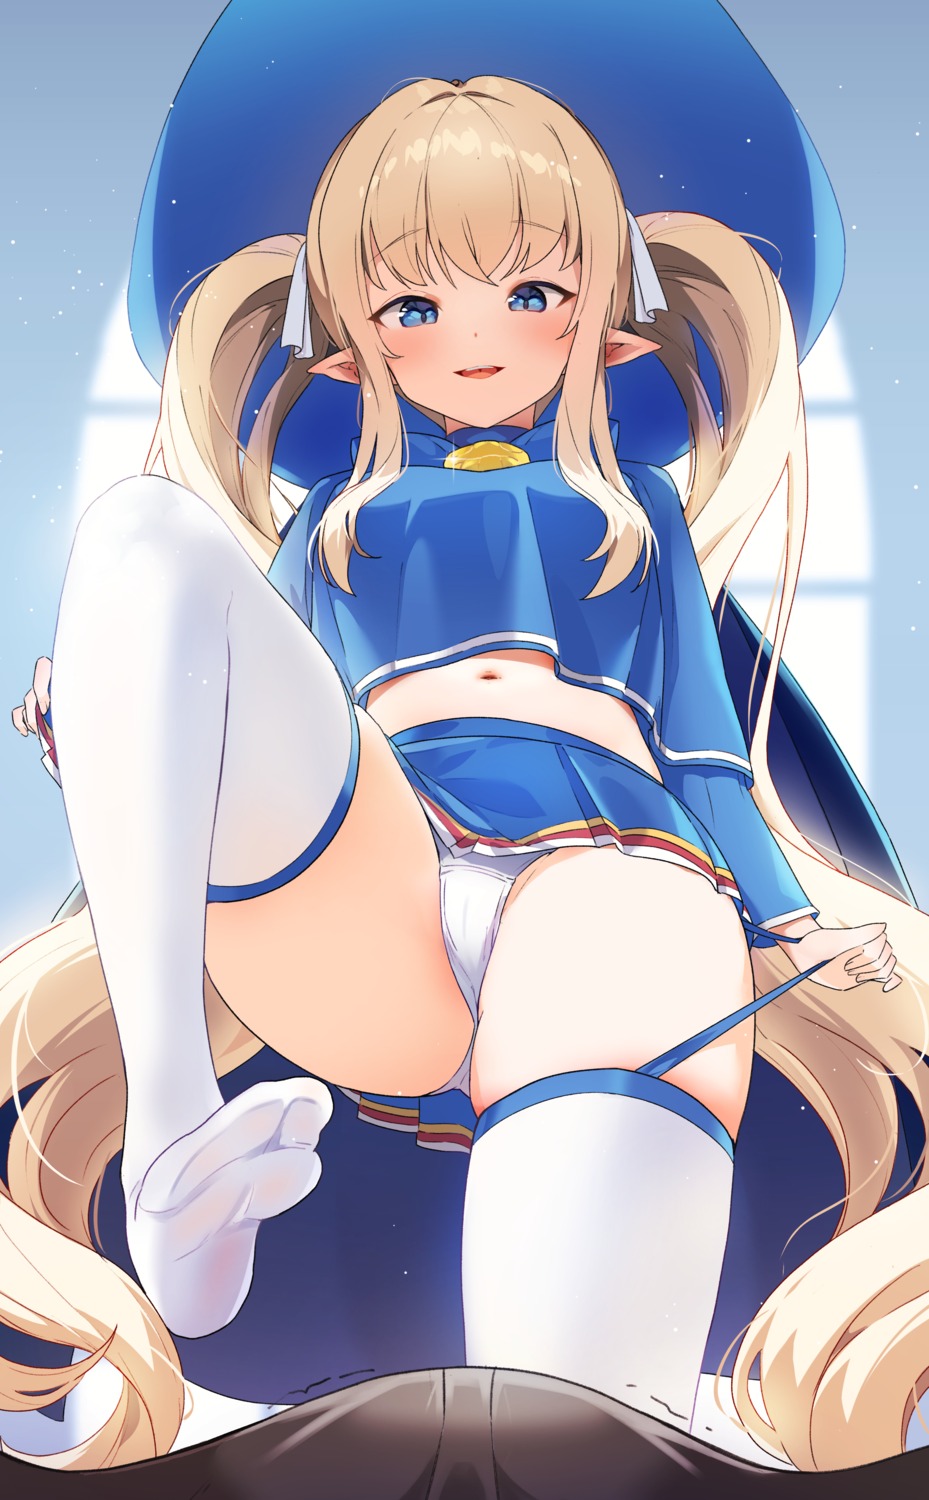 dungeon_fighter feet hey_chony pantsu pointy_ears skirt_lift stockings thighhighs